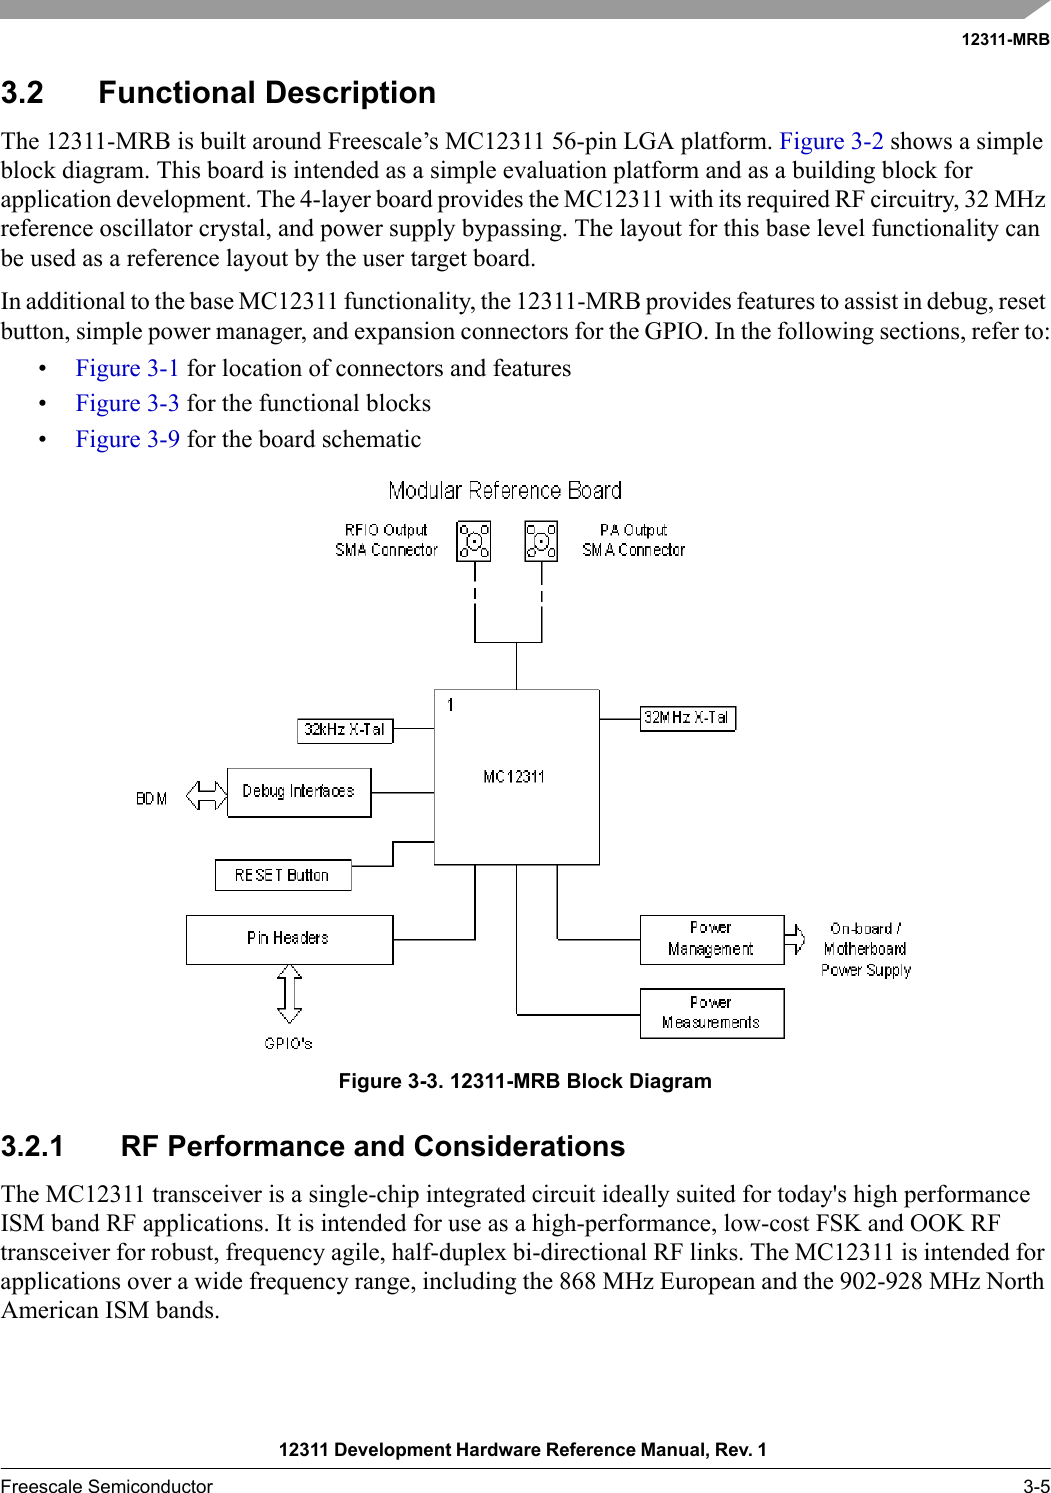 12311-MRB12311 Development Hardware Reference Manual, Rev. 1 Freescale Semiconductor 3-53.2 Functional DescriptionThe 12311-MRB is built around Freescale’s MC12311 56-pin LGA platform. Figure 3-2 shows a simple block diagram. This board is intended as a simple evaluation platform and as a building block for application development. The 4-layer board provides the MC12311 with its required RF circuitry, 32 MHz reference oscillator crystal, and power supply bypassing. The layout for this base level functionality can be used as a reference layout by the user target board.In additional to the base MC12311 functionality, the 12311-MRB provides features to assist in debug, reset button, simple power manager, and expansion connectors for the GPIO. In the following sections, refer to:•Figure 3-1 for location of connectors and features•Figure 3-3 for the functional blocks•Figure 3-9 for the board schematicFigure 3-3. 12311-MRB Block Diagram3.2.1 RF Performance and ConsiderationsThe MC12311 transceiver is a single-chip integrated circuit ideally suited for today&apos;s high performance ISM band RF applications. It is intended for use as a high-performance, low-cost FSK and OOK RF transceiver for robust, frequency agile, half-duplex bi-directional RF links. The MC12311 is intended for applications over a wide frequency range, including the 868 MHz European and the 902-928 MHz North American ISM bands.